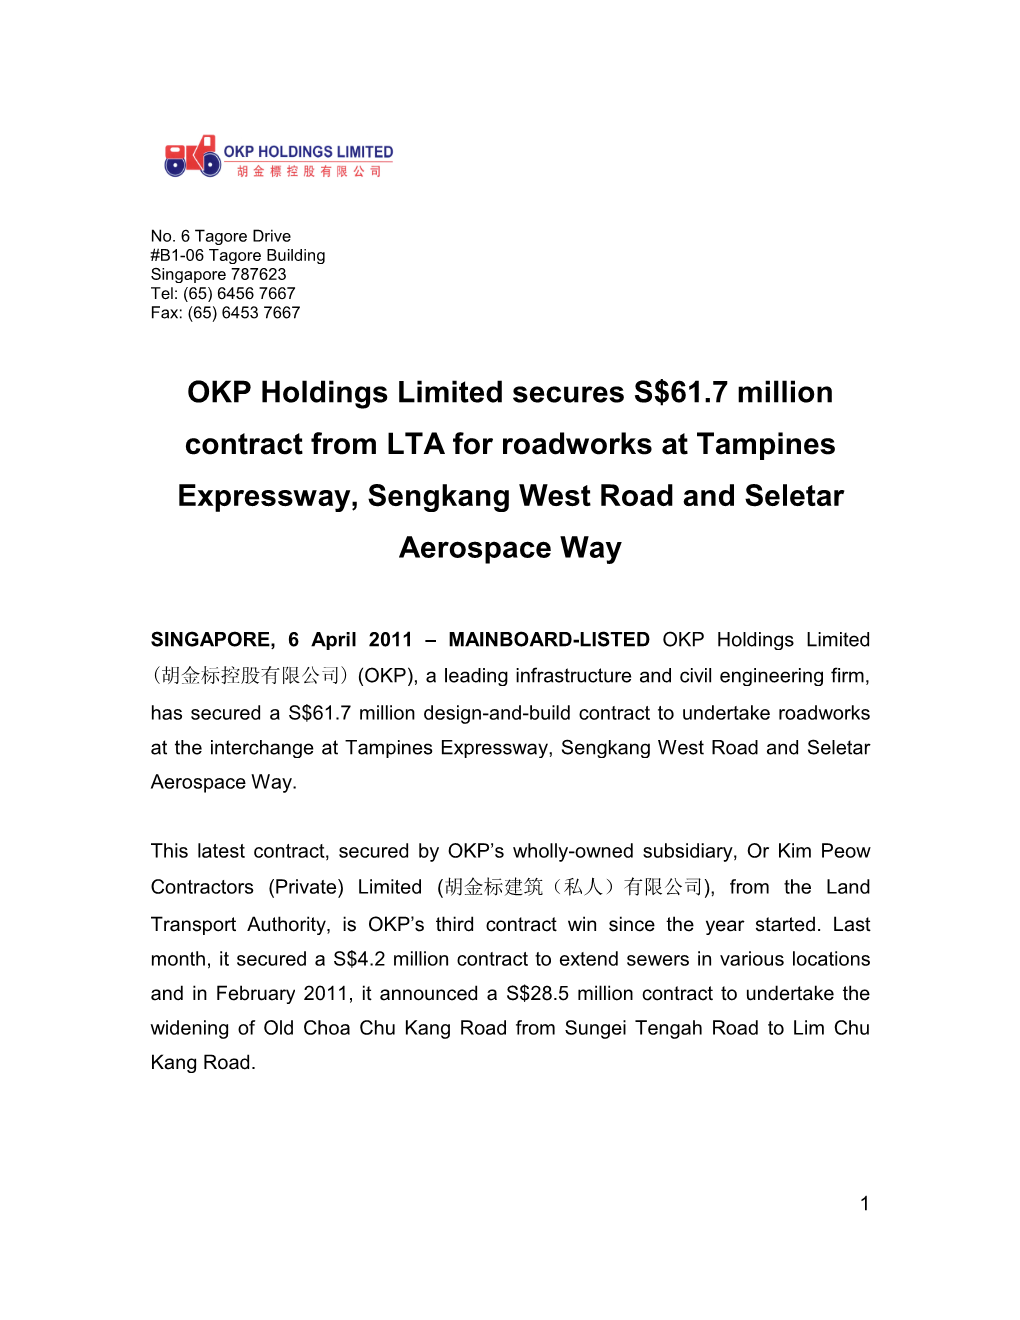 OKP Holdings Limited Secures S$61.7 Million Contract from LTA for Roadworks at Tampines Expressway, Sengkang West Road and Seletar Aerospace Way